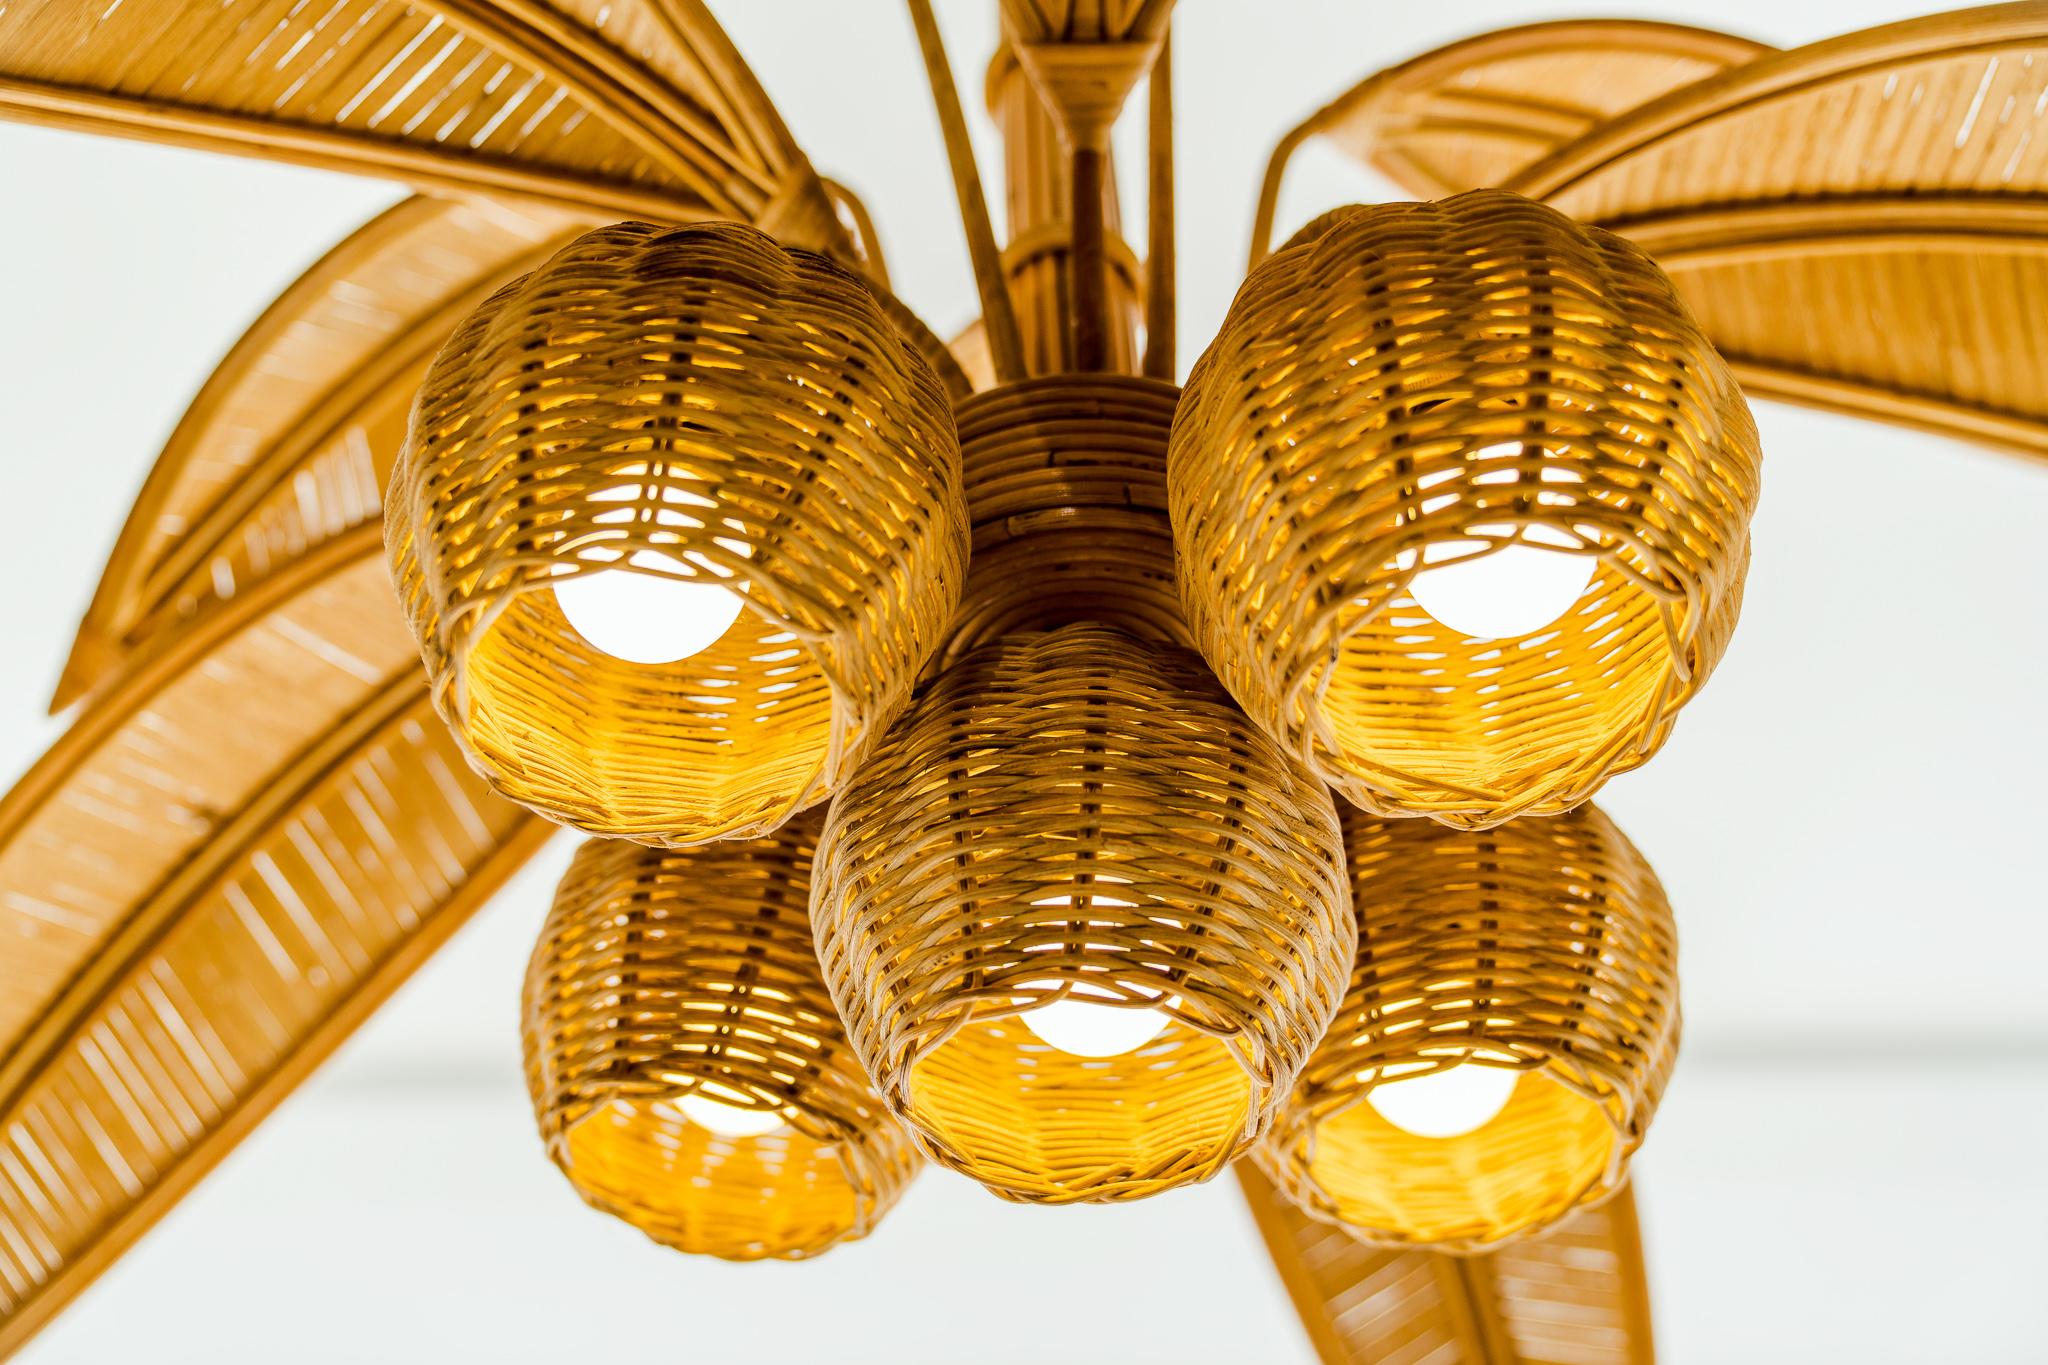 Rattan « coconut tree/palm tree » ceiling light For Sale 4